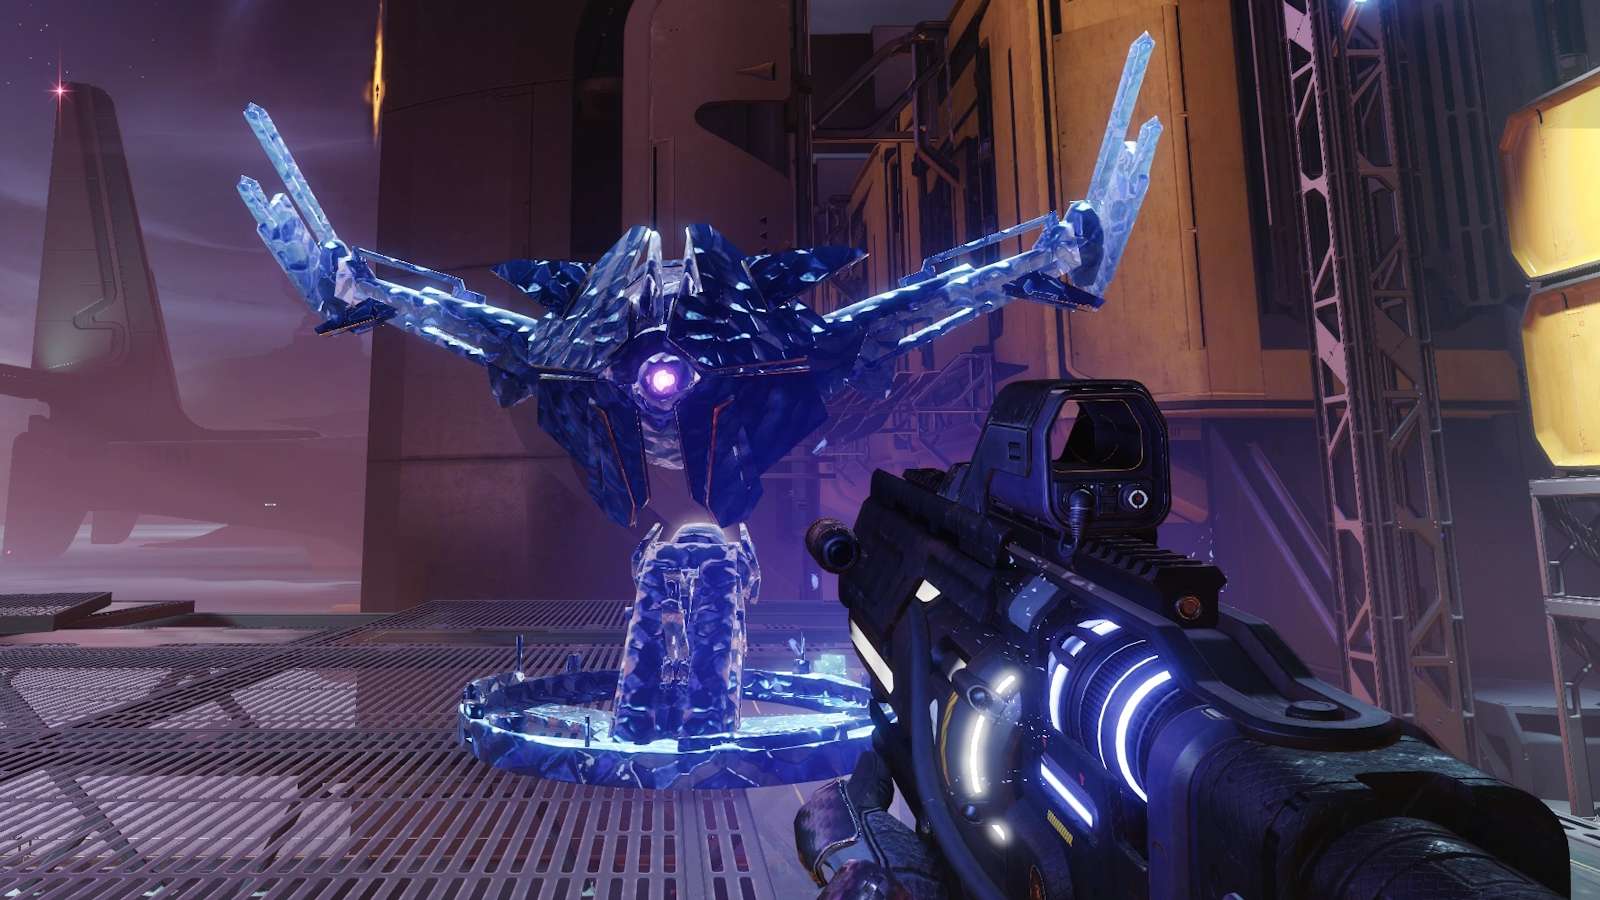 Chill Clip Riptide freezing large Vex enemy in Destiny 2.